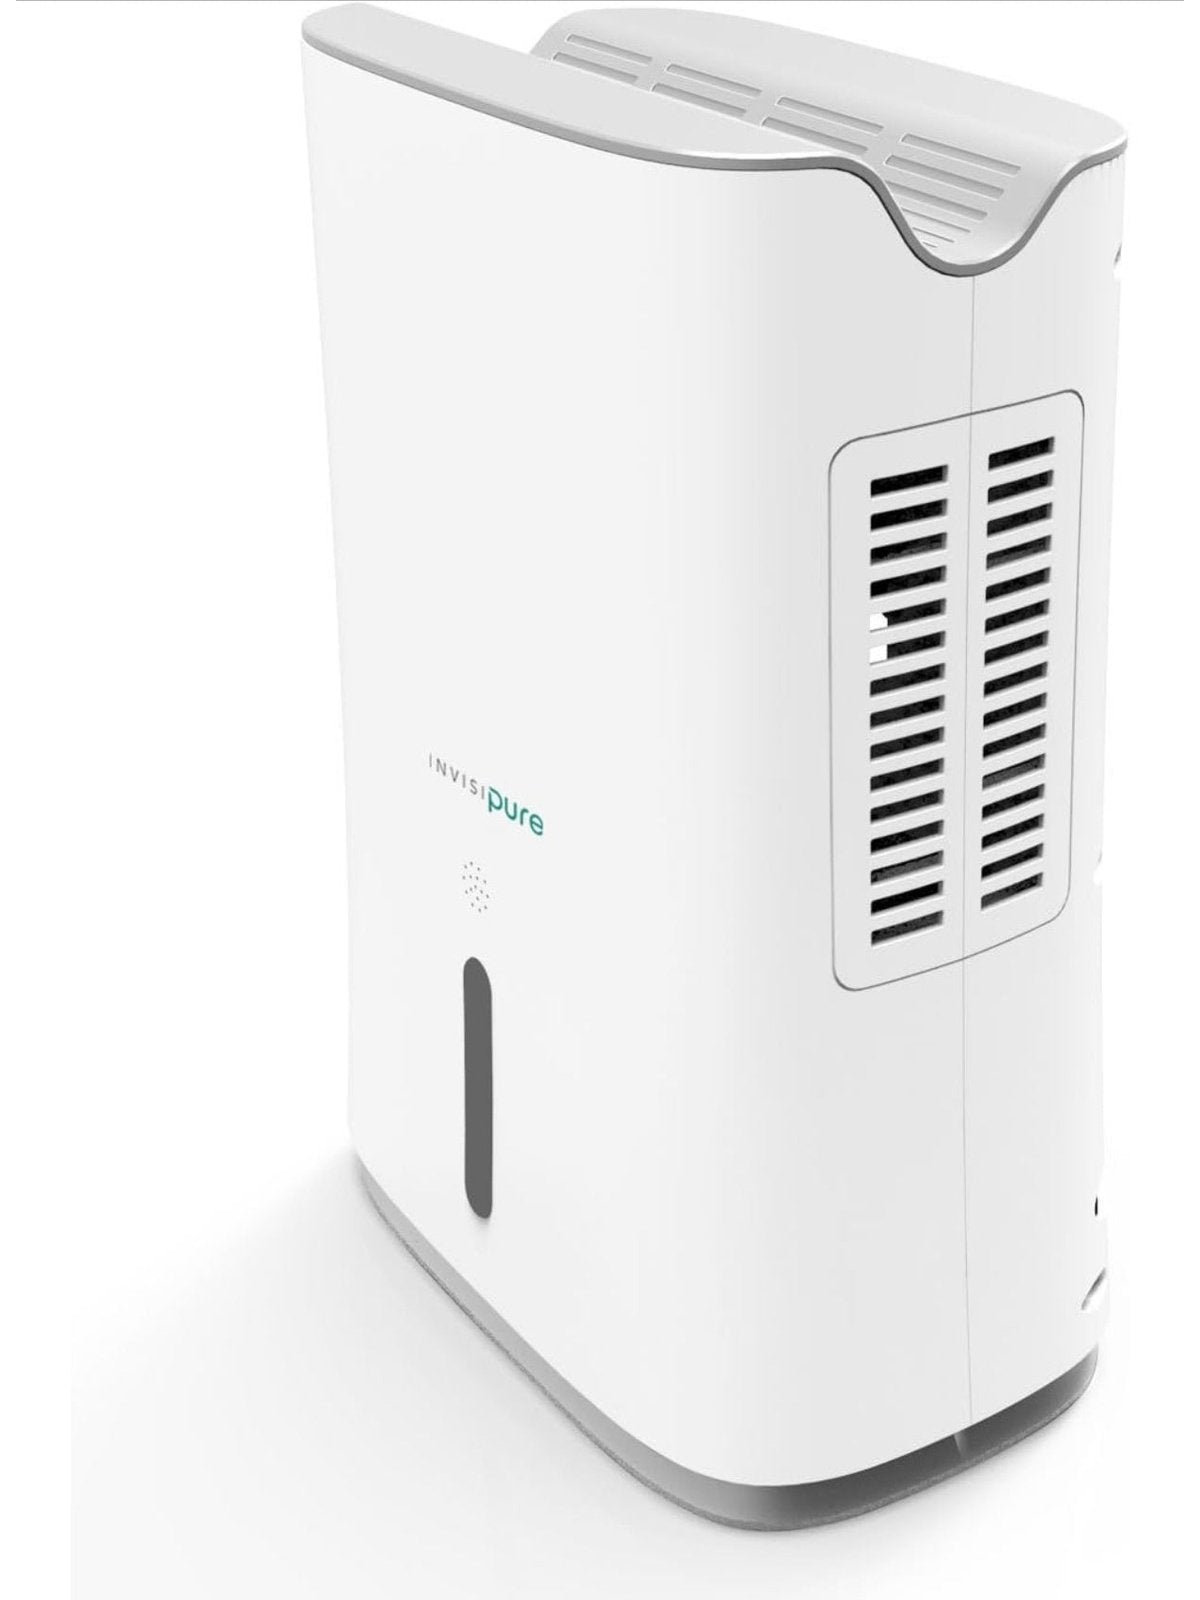 Hydrowave Dehumidifier - Small Compact Portable Dehumidifier for Home, RV, Bathroom, Closet, Bedroom, Small Room, Basement, Boat, Mold - Continuous Drain Hose Ready - Quiet Electric Peltier